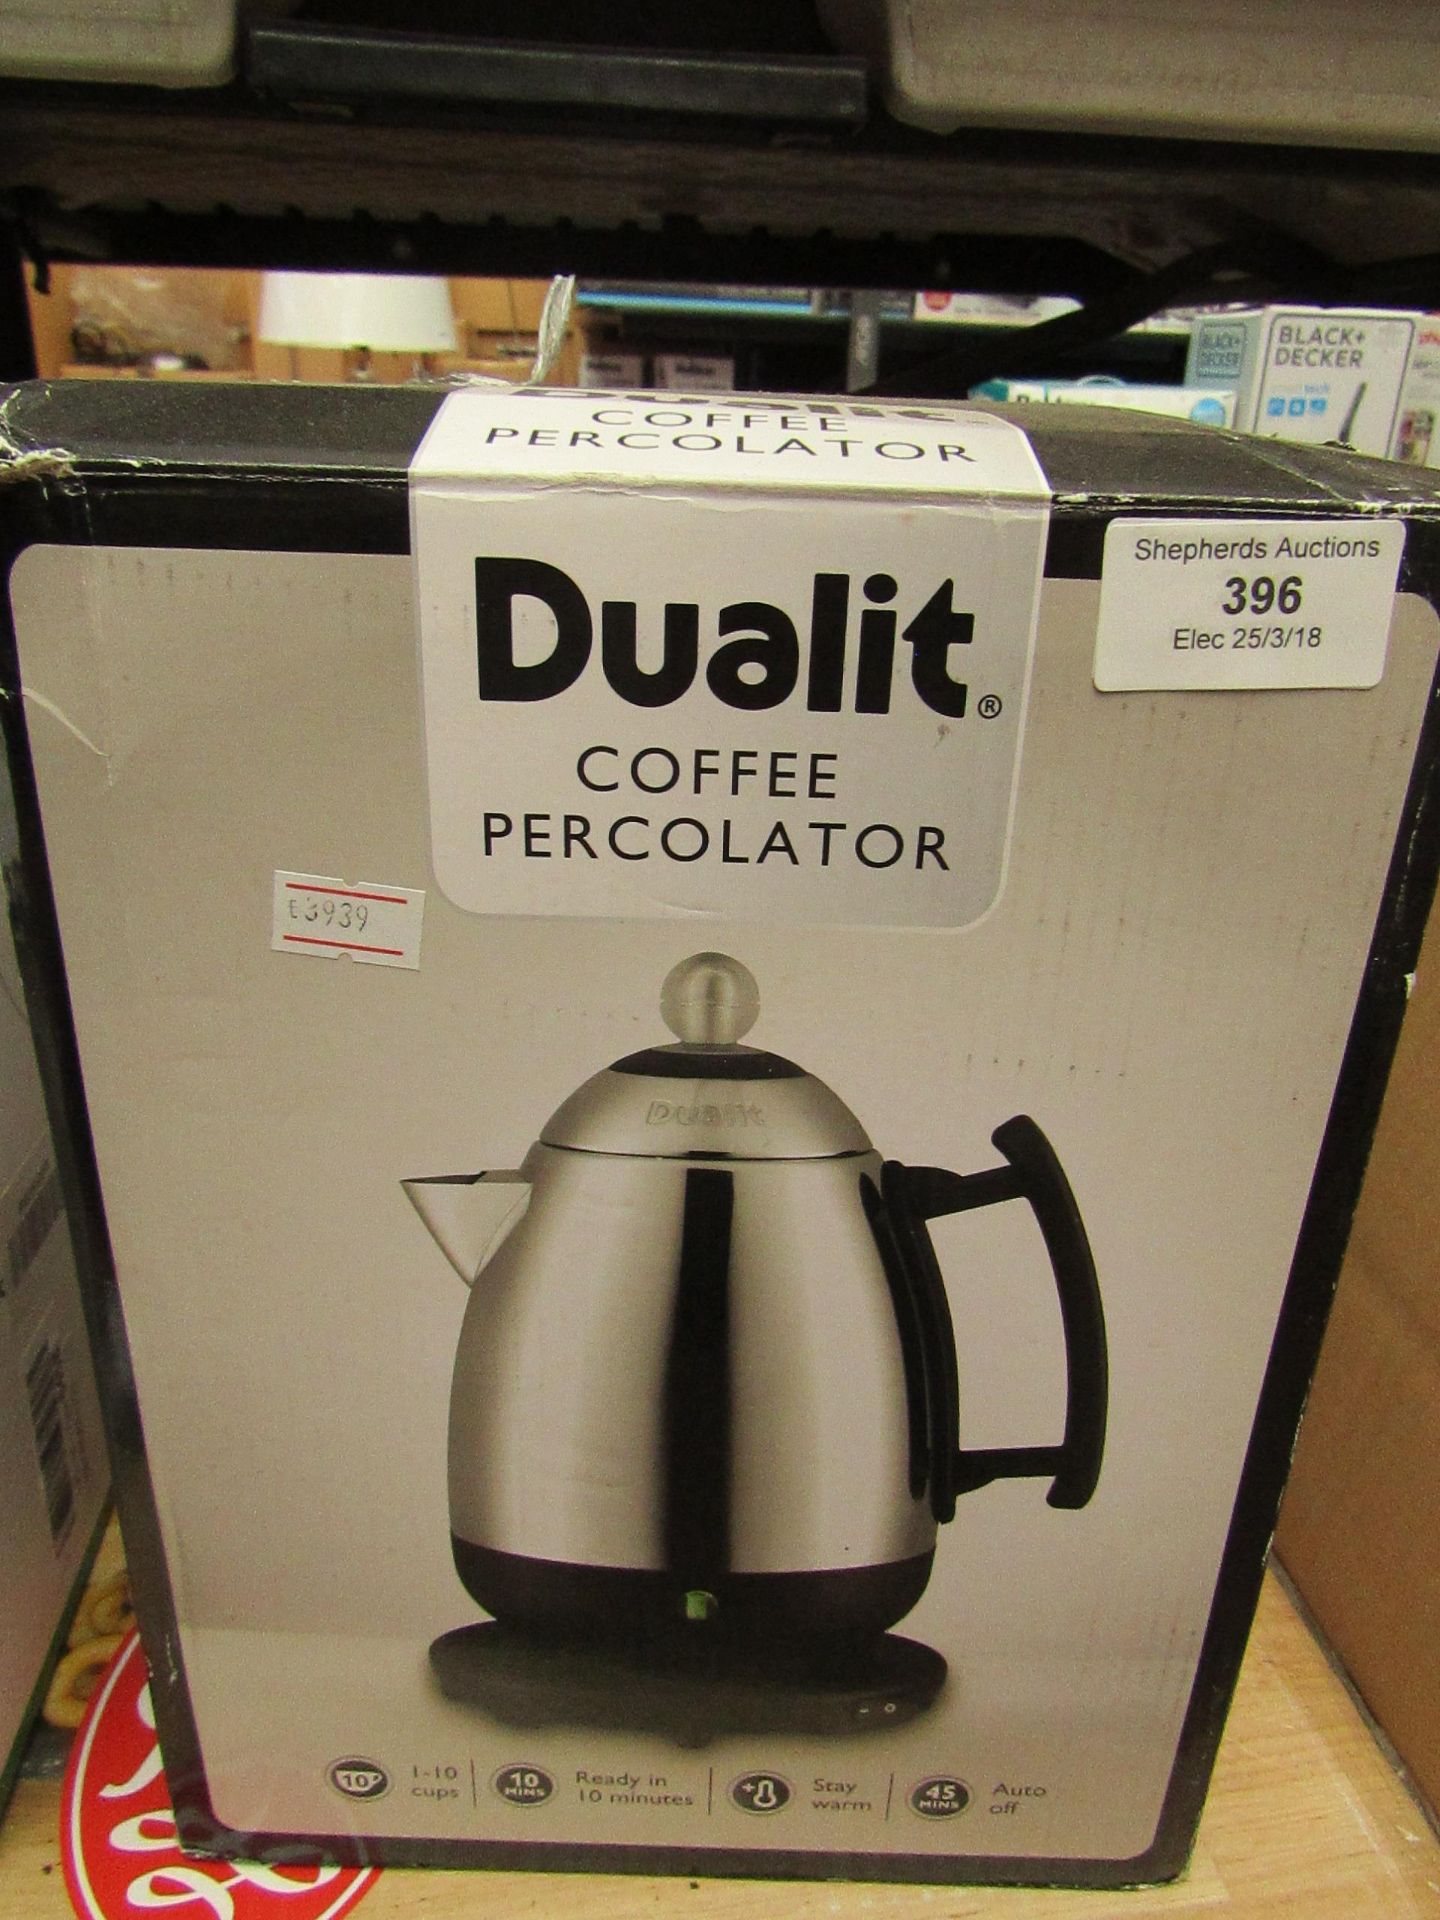 Dualit coffee percolator. Tested working & boxed.